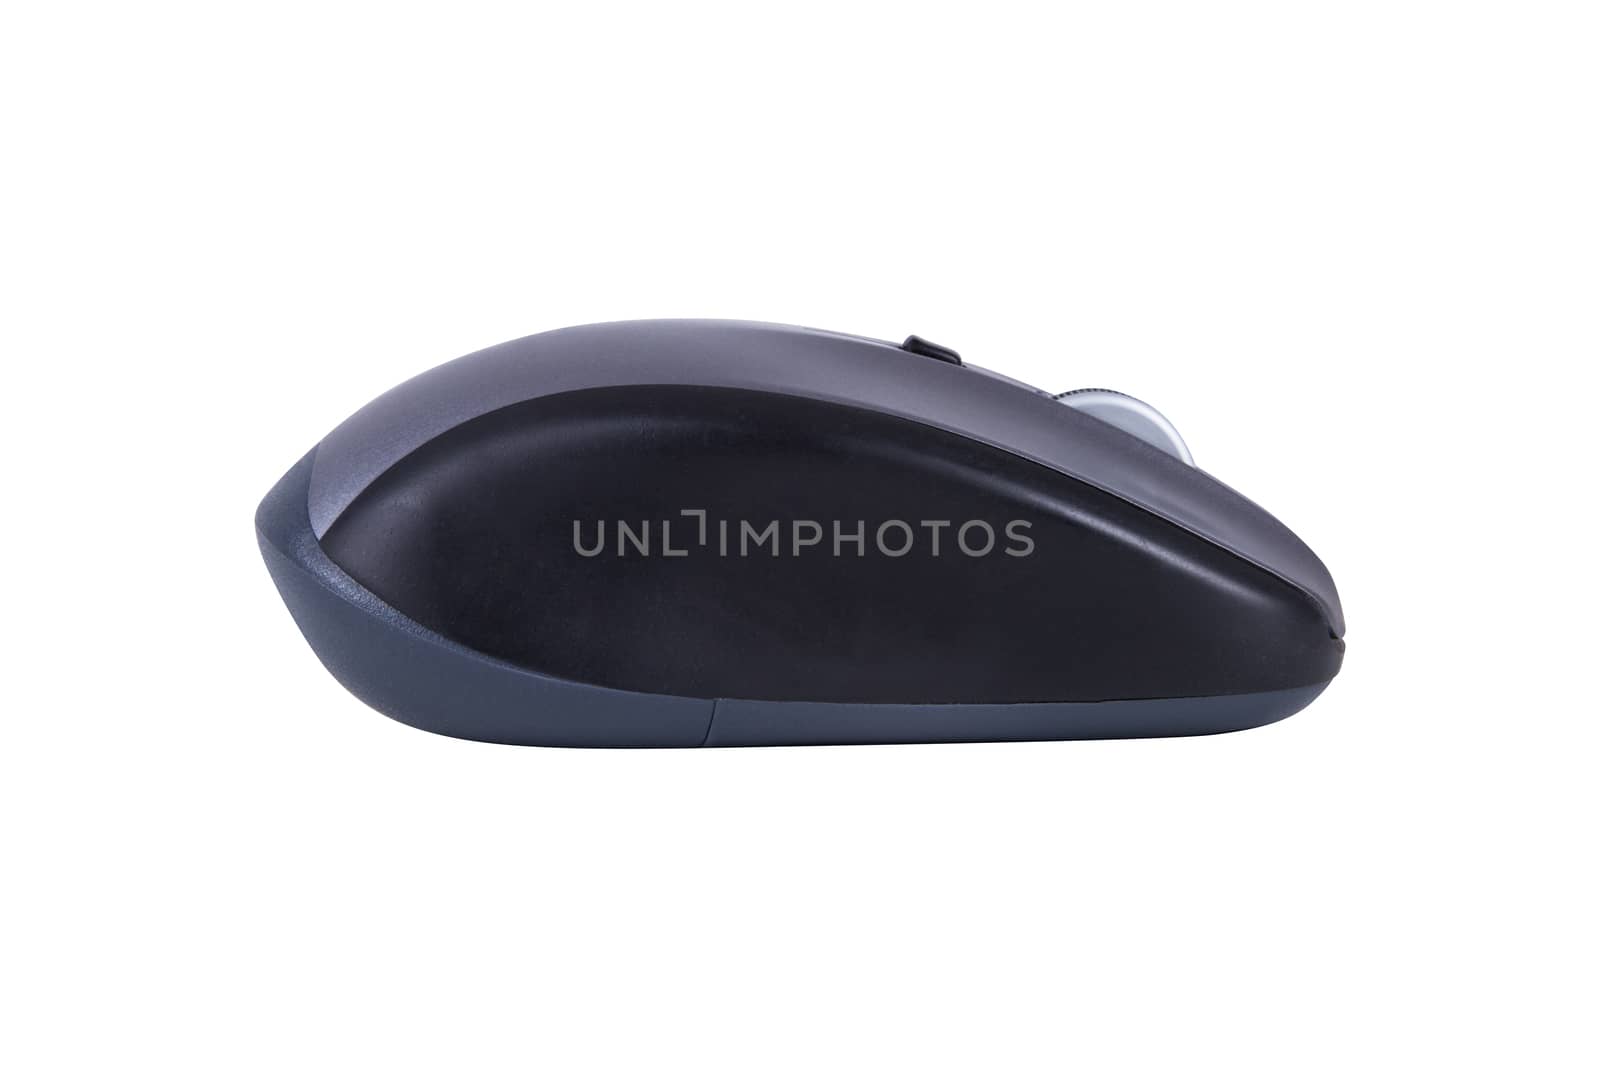 Single wireless mouse of desktop computer, side view, isolated on white background.